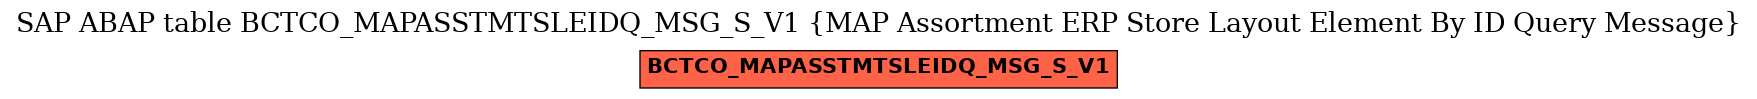 E-R Diagram for table BCTCO_MAPASSTMTSLEIDQ_MSG_S_V1 (MAP Assortment ERP Store Layout Element By ID Query Message)